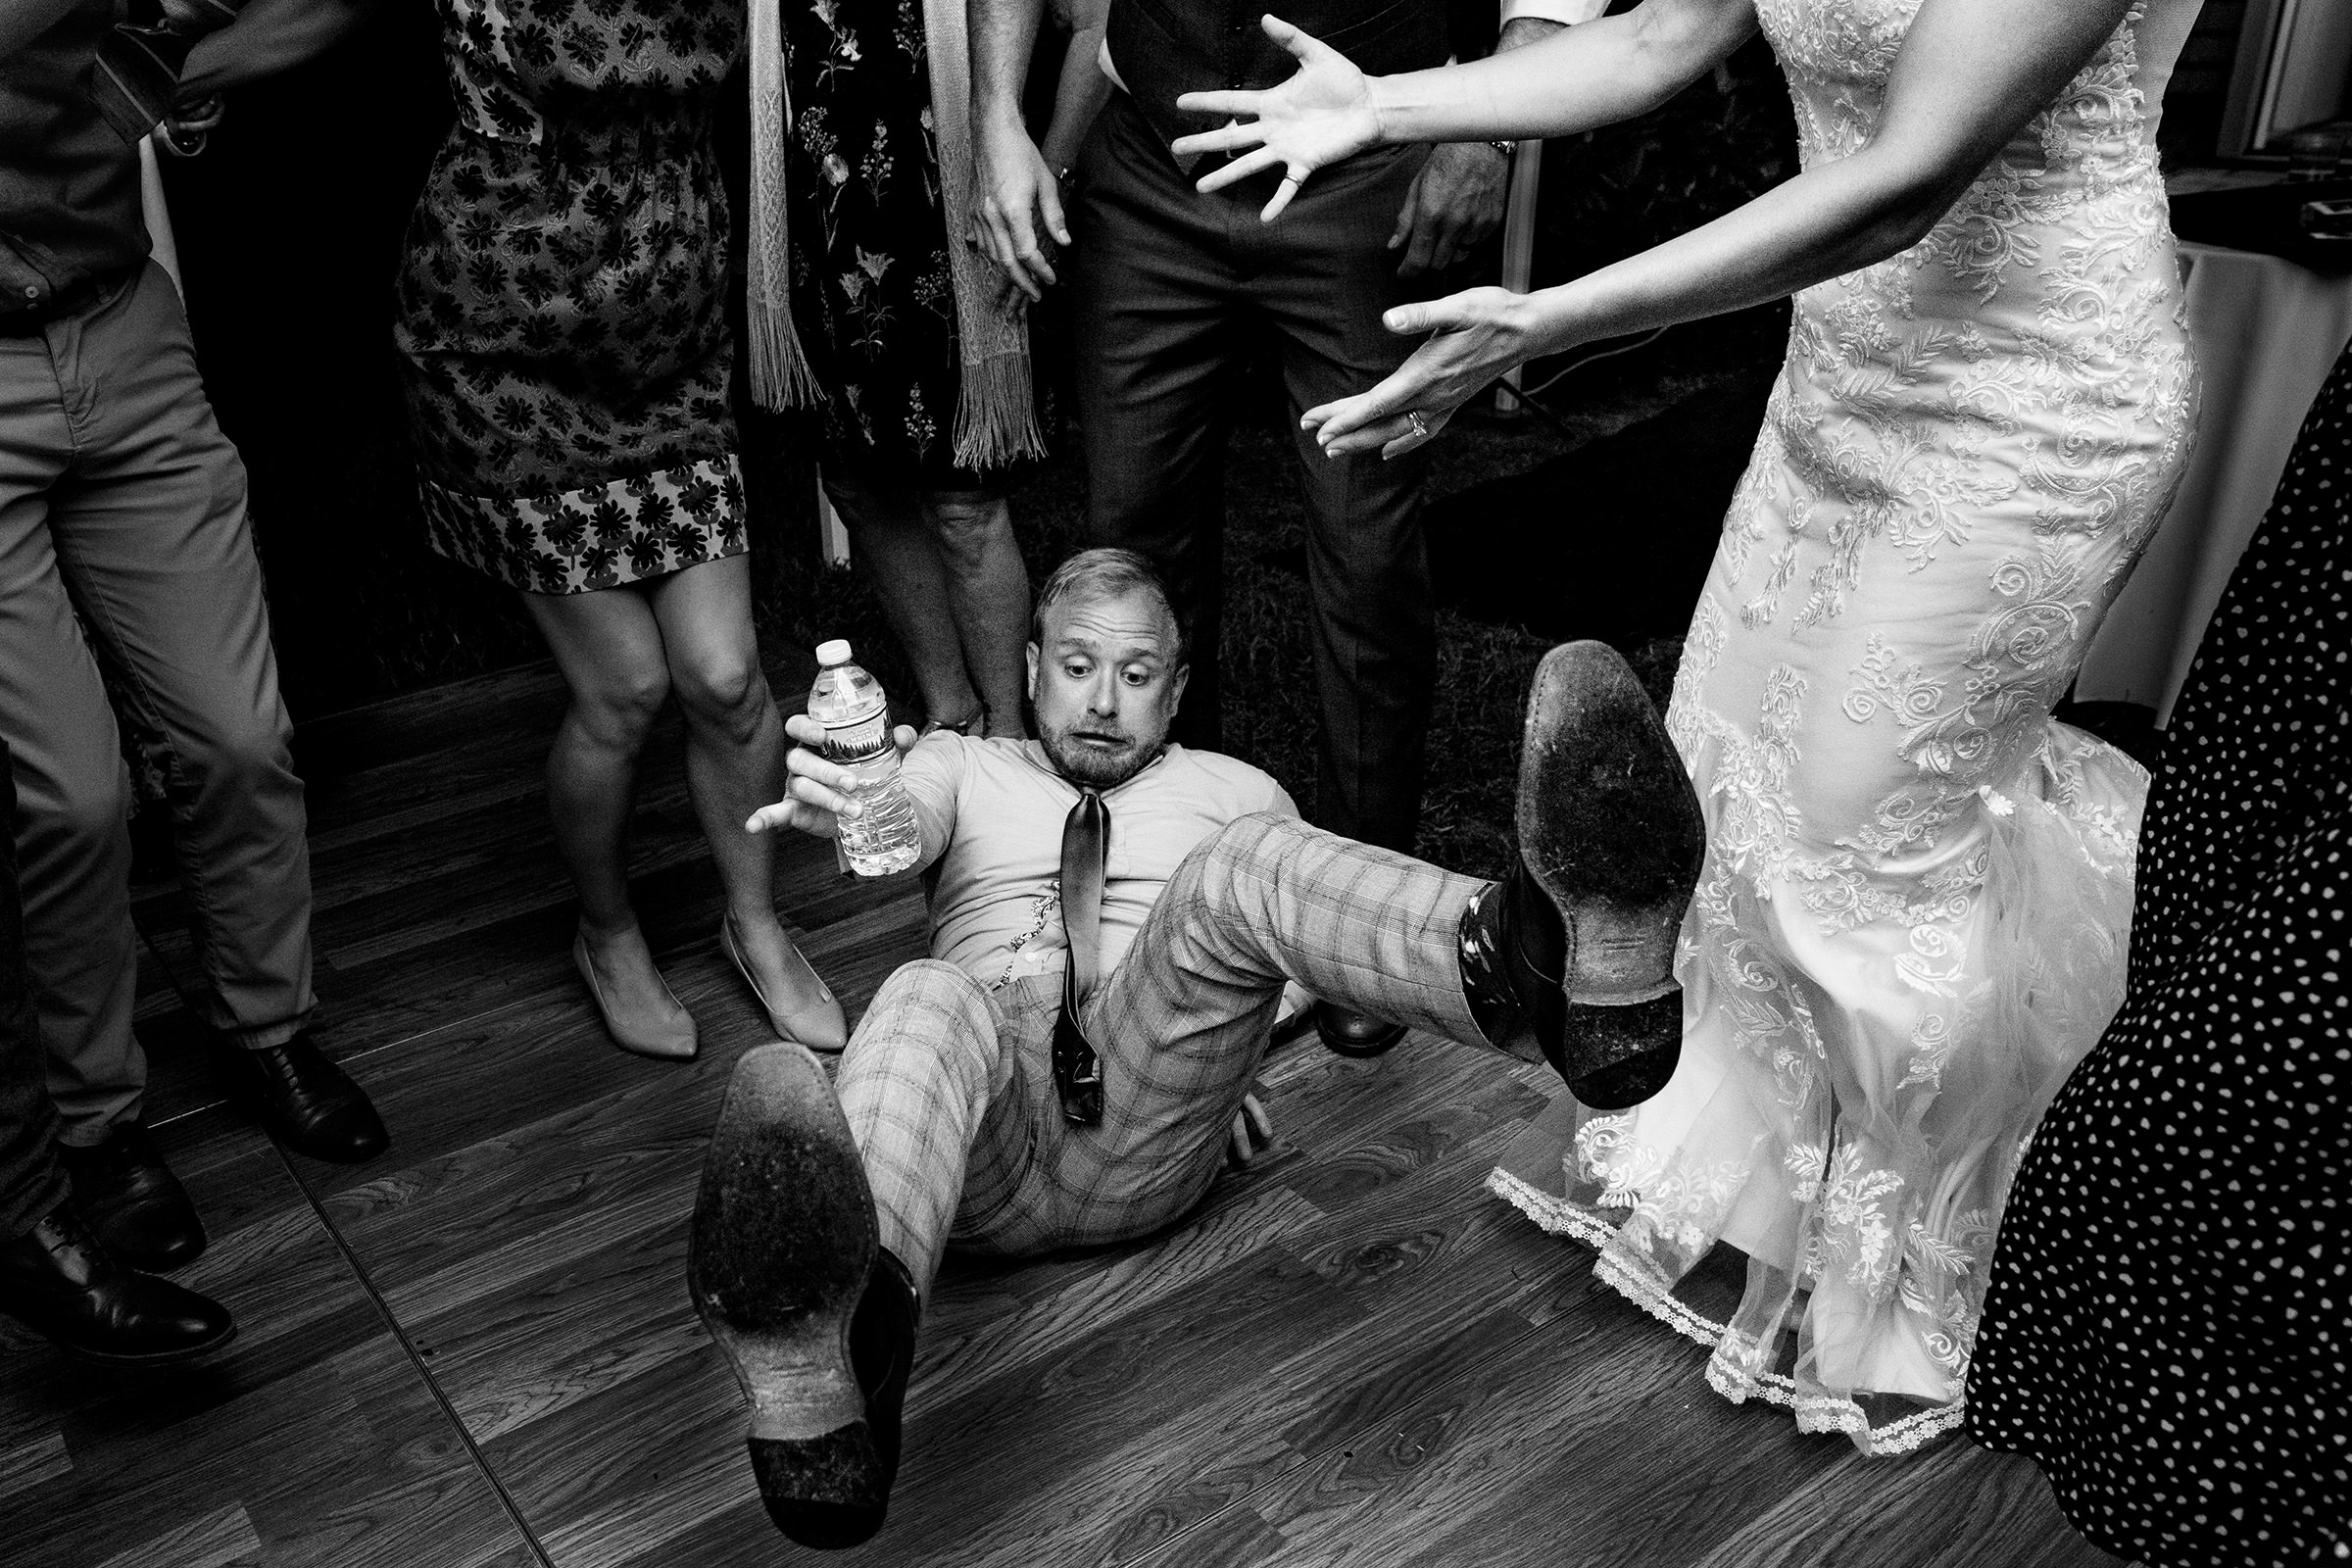 A wedding guest falls on the dance floor at a central Maine wedding.